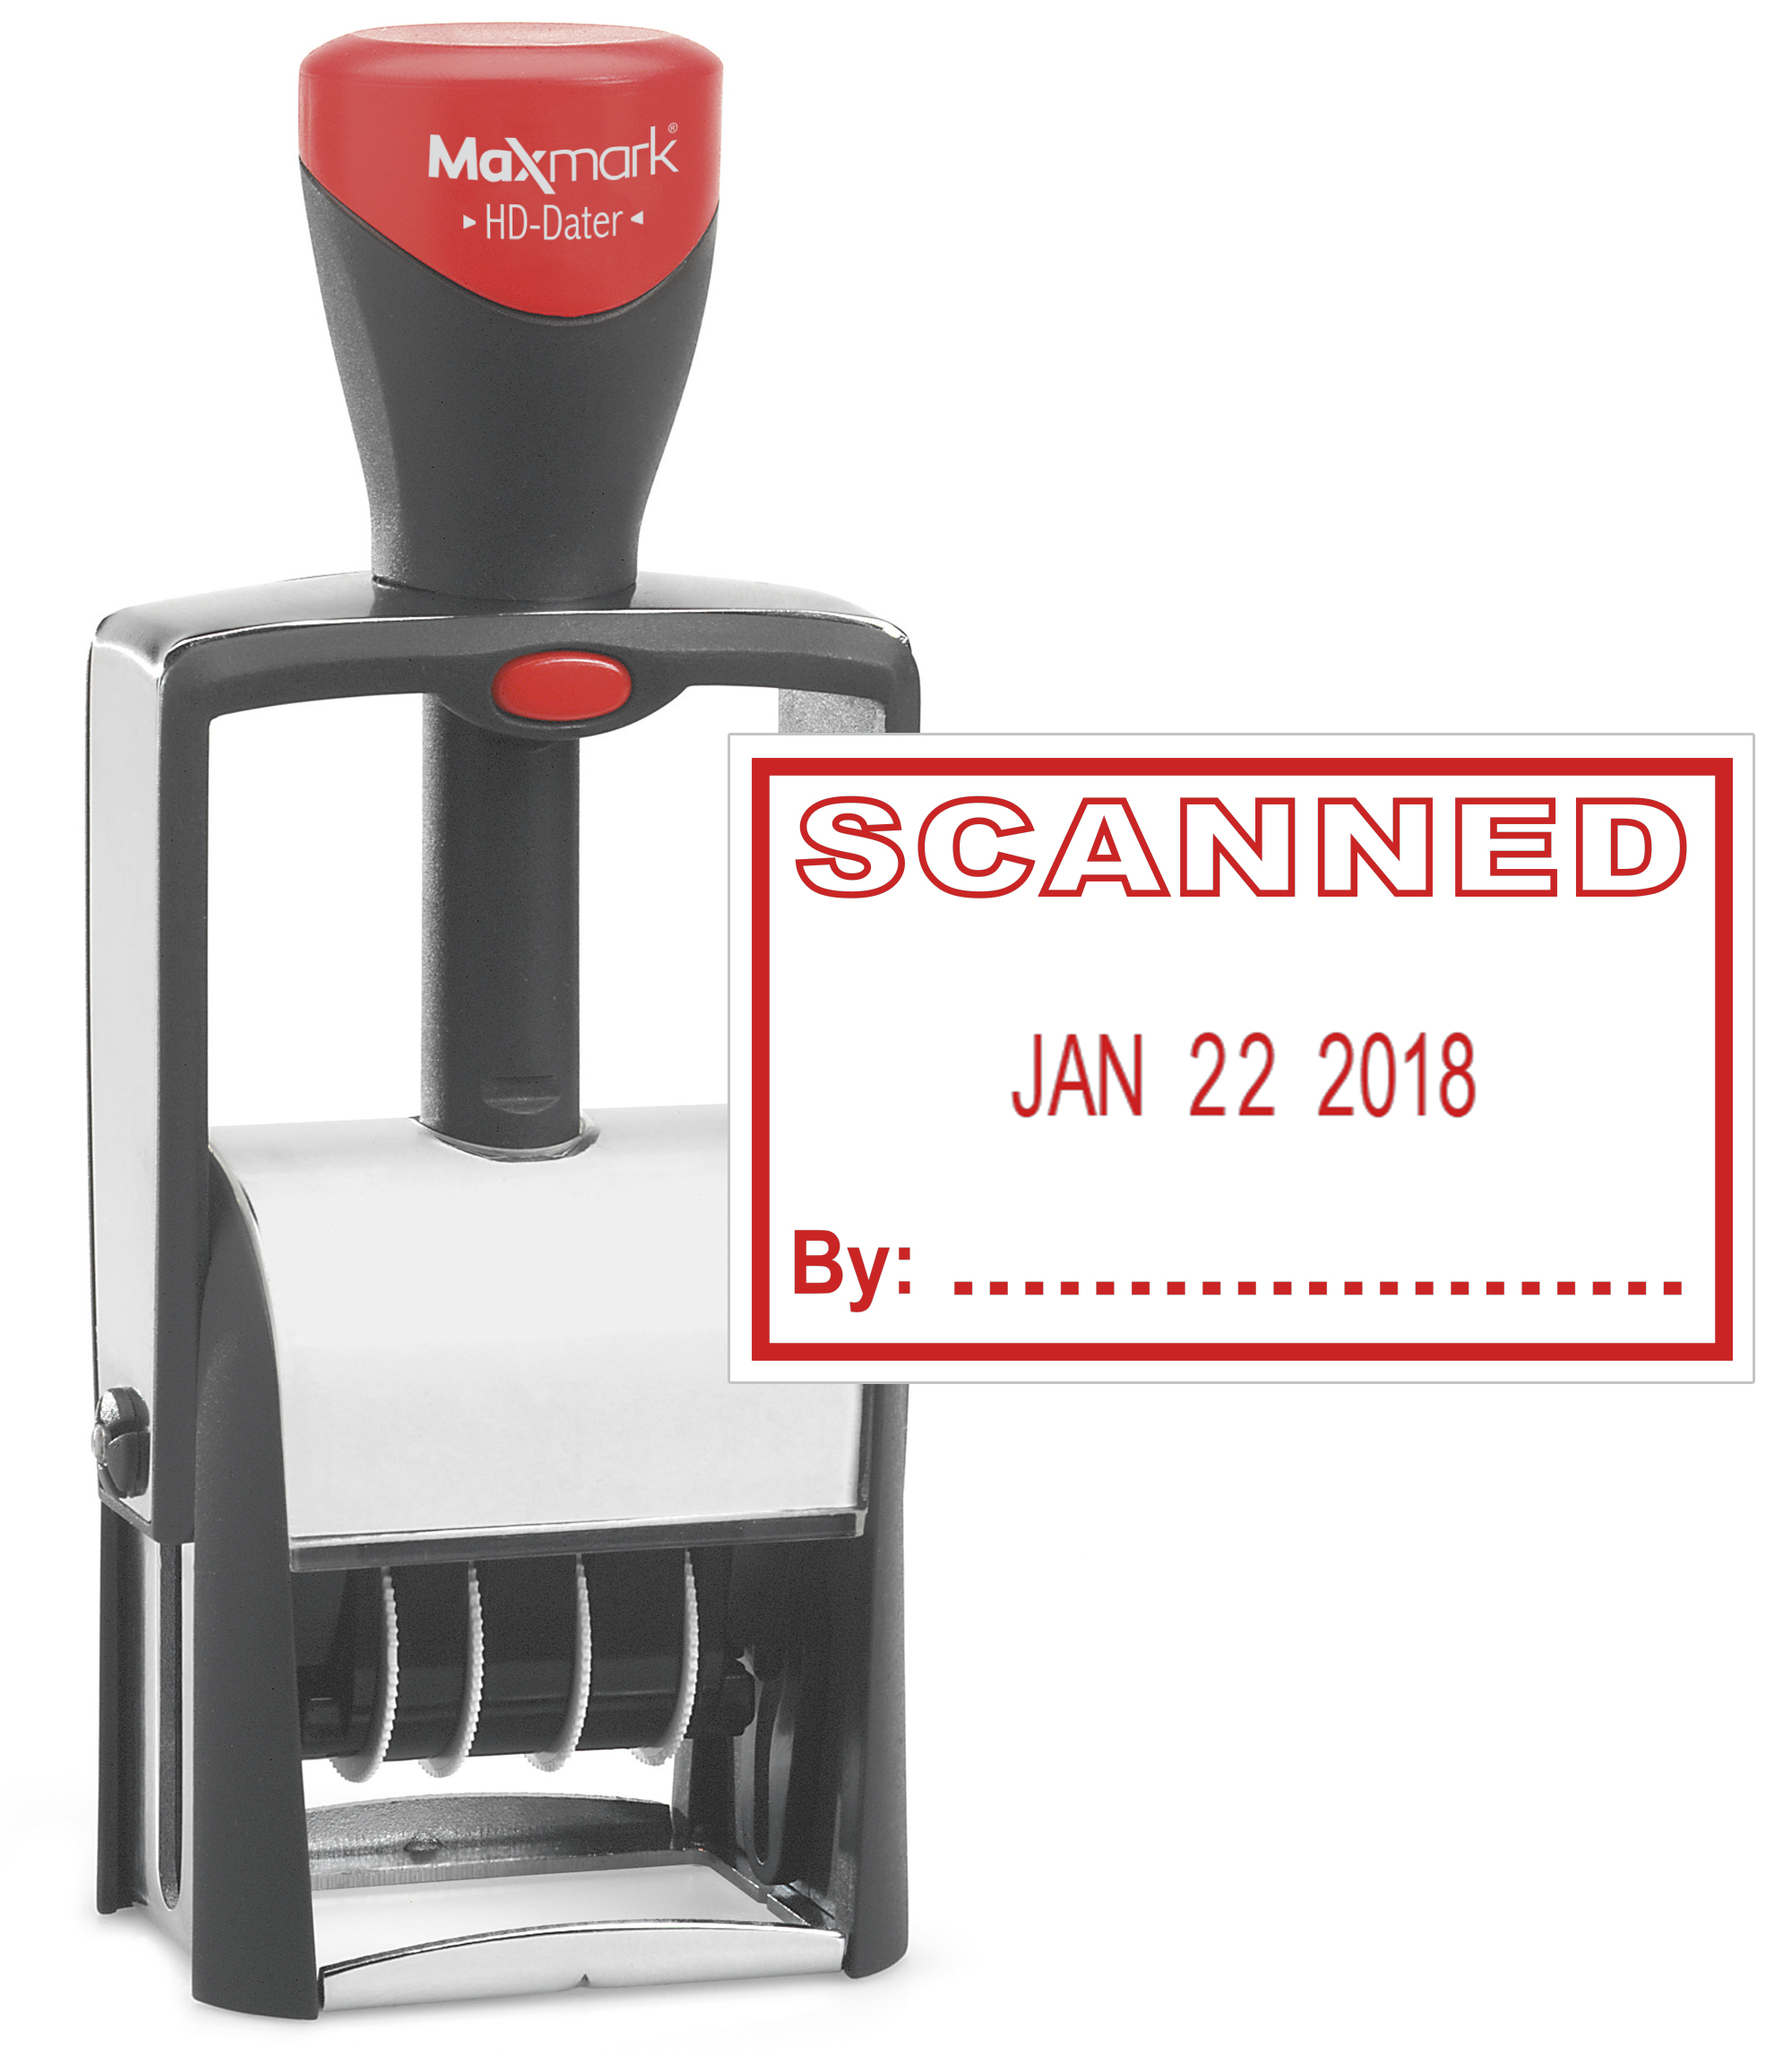 Heavy Duty Date Stamp with "SCANNED" Self Inking Stamp - RED Ink